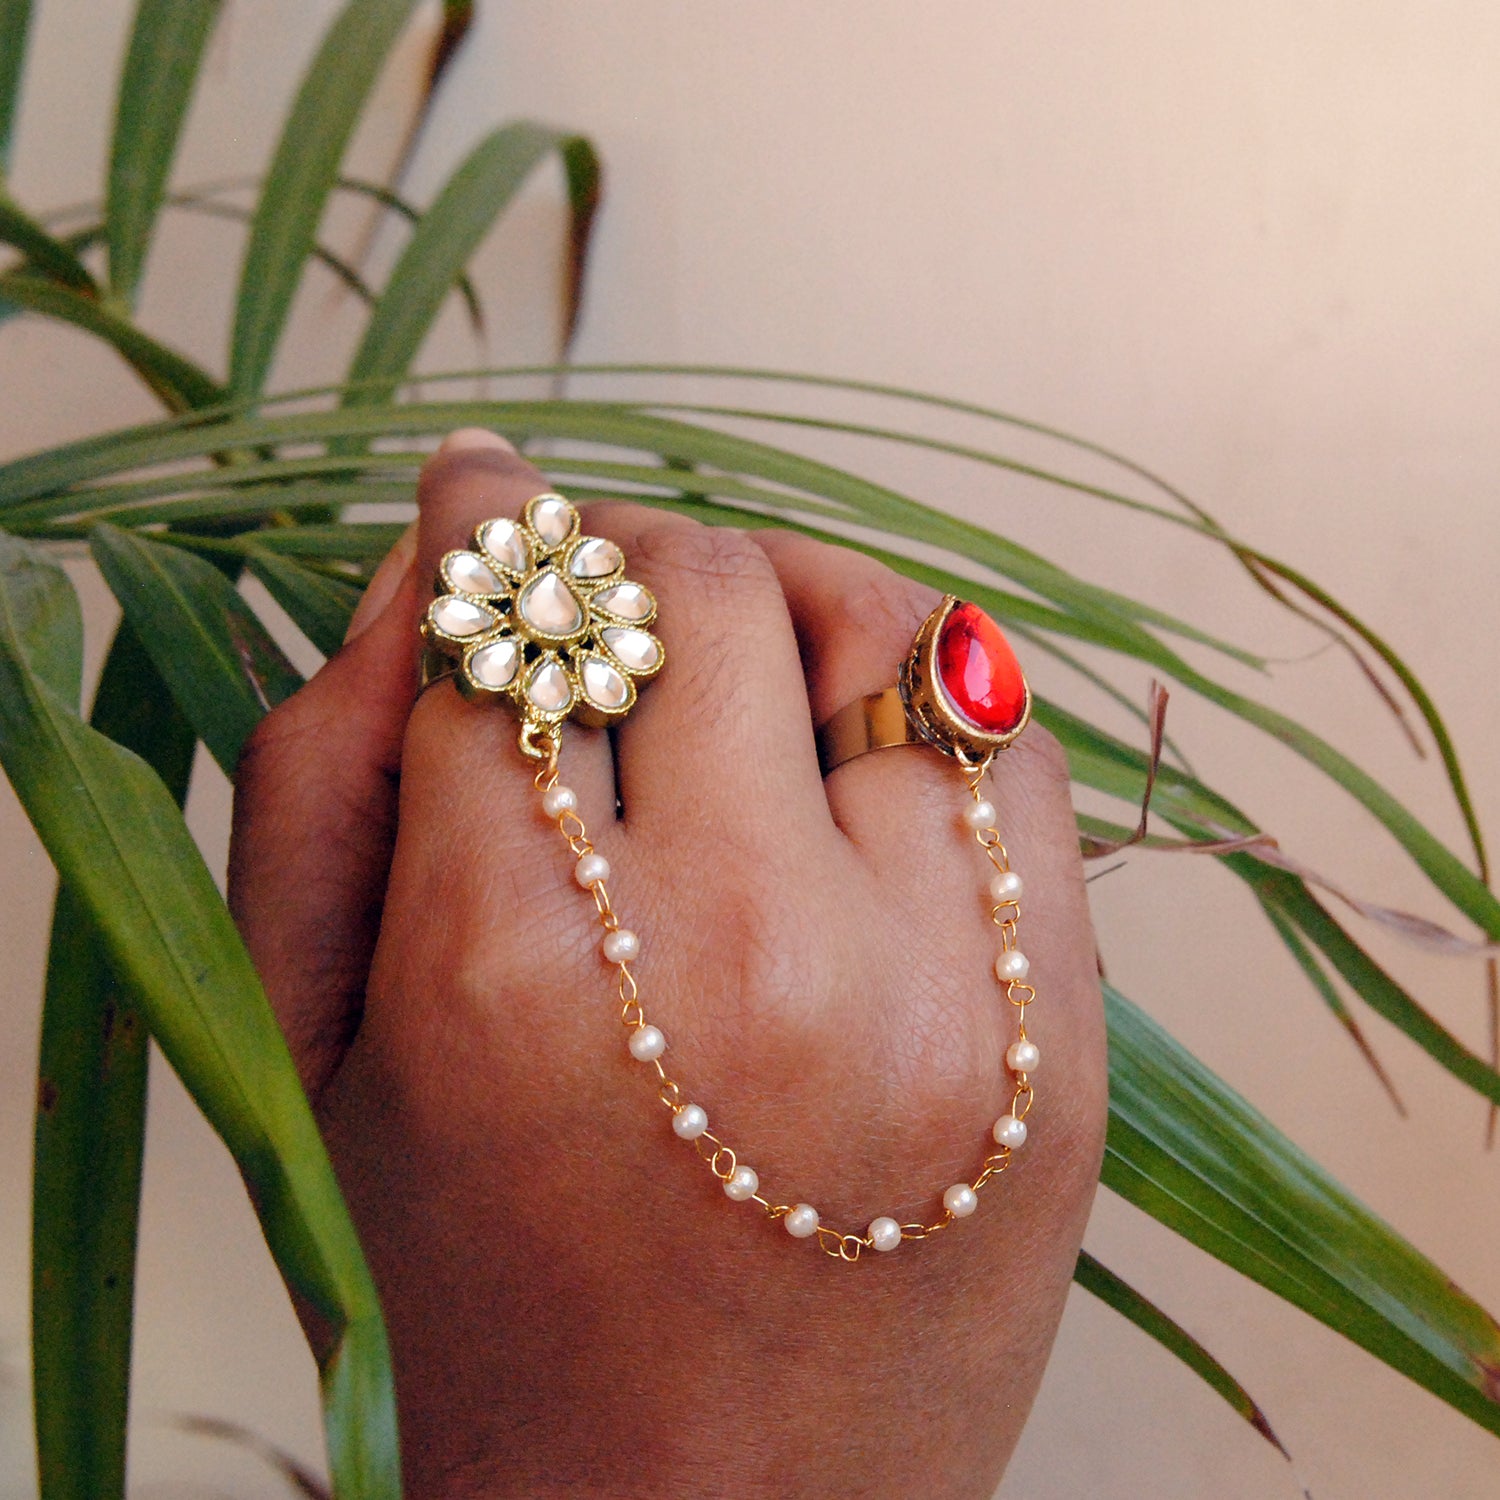 Beabhika Handmade Artificial Jewelry Adjustable Kundan Ring Gold Tone Two Finger Ring Adjustable Kundan Statement Rings Cocktail Easy To Wear Green Color Rings White Pearl Chain Ring Gold Tone Rings Available On COD In India Delhi Traditional Heeramandi Style Jewelryfinger ring